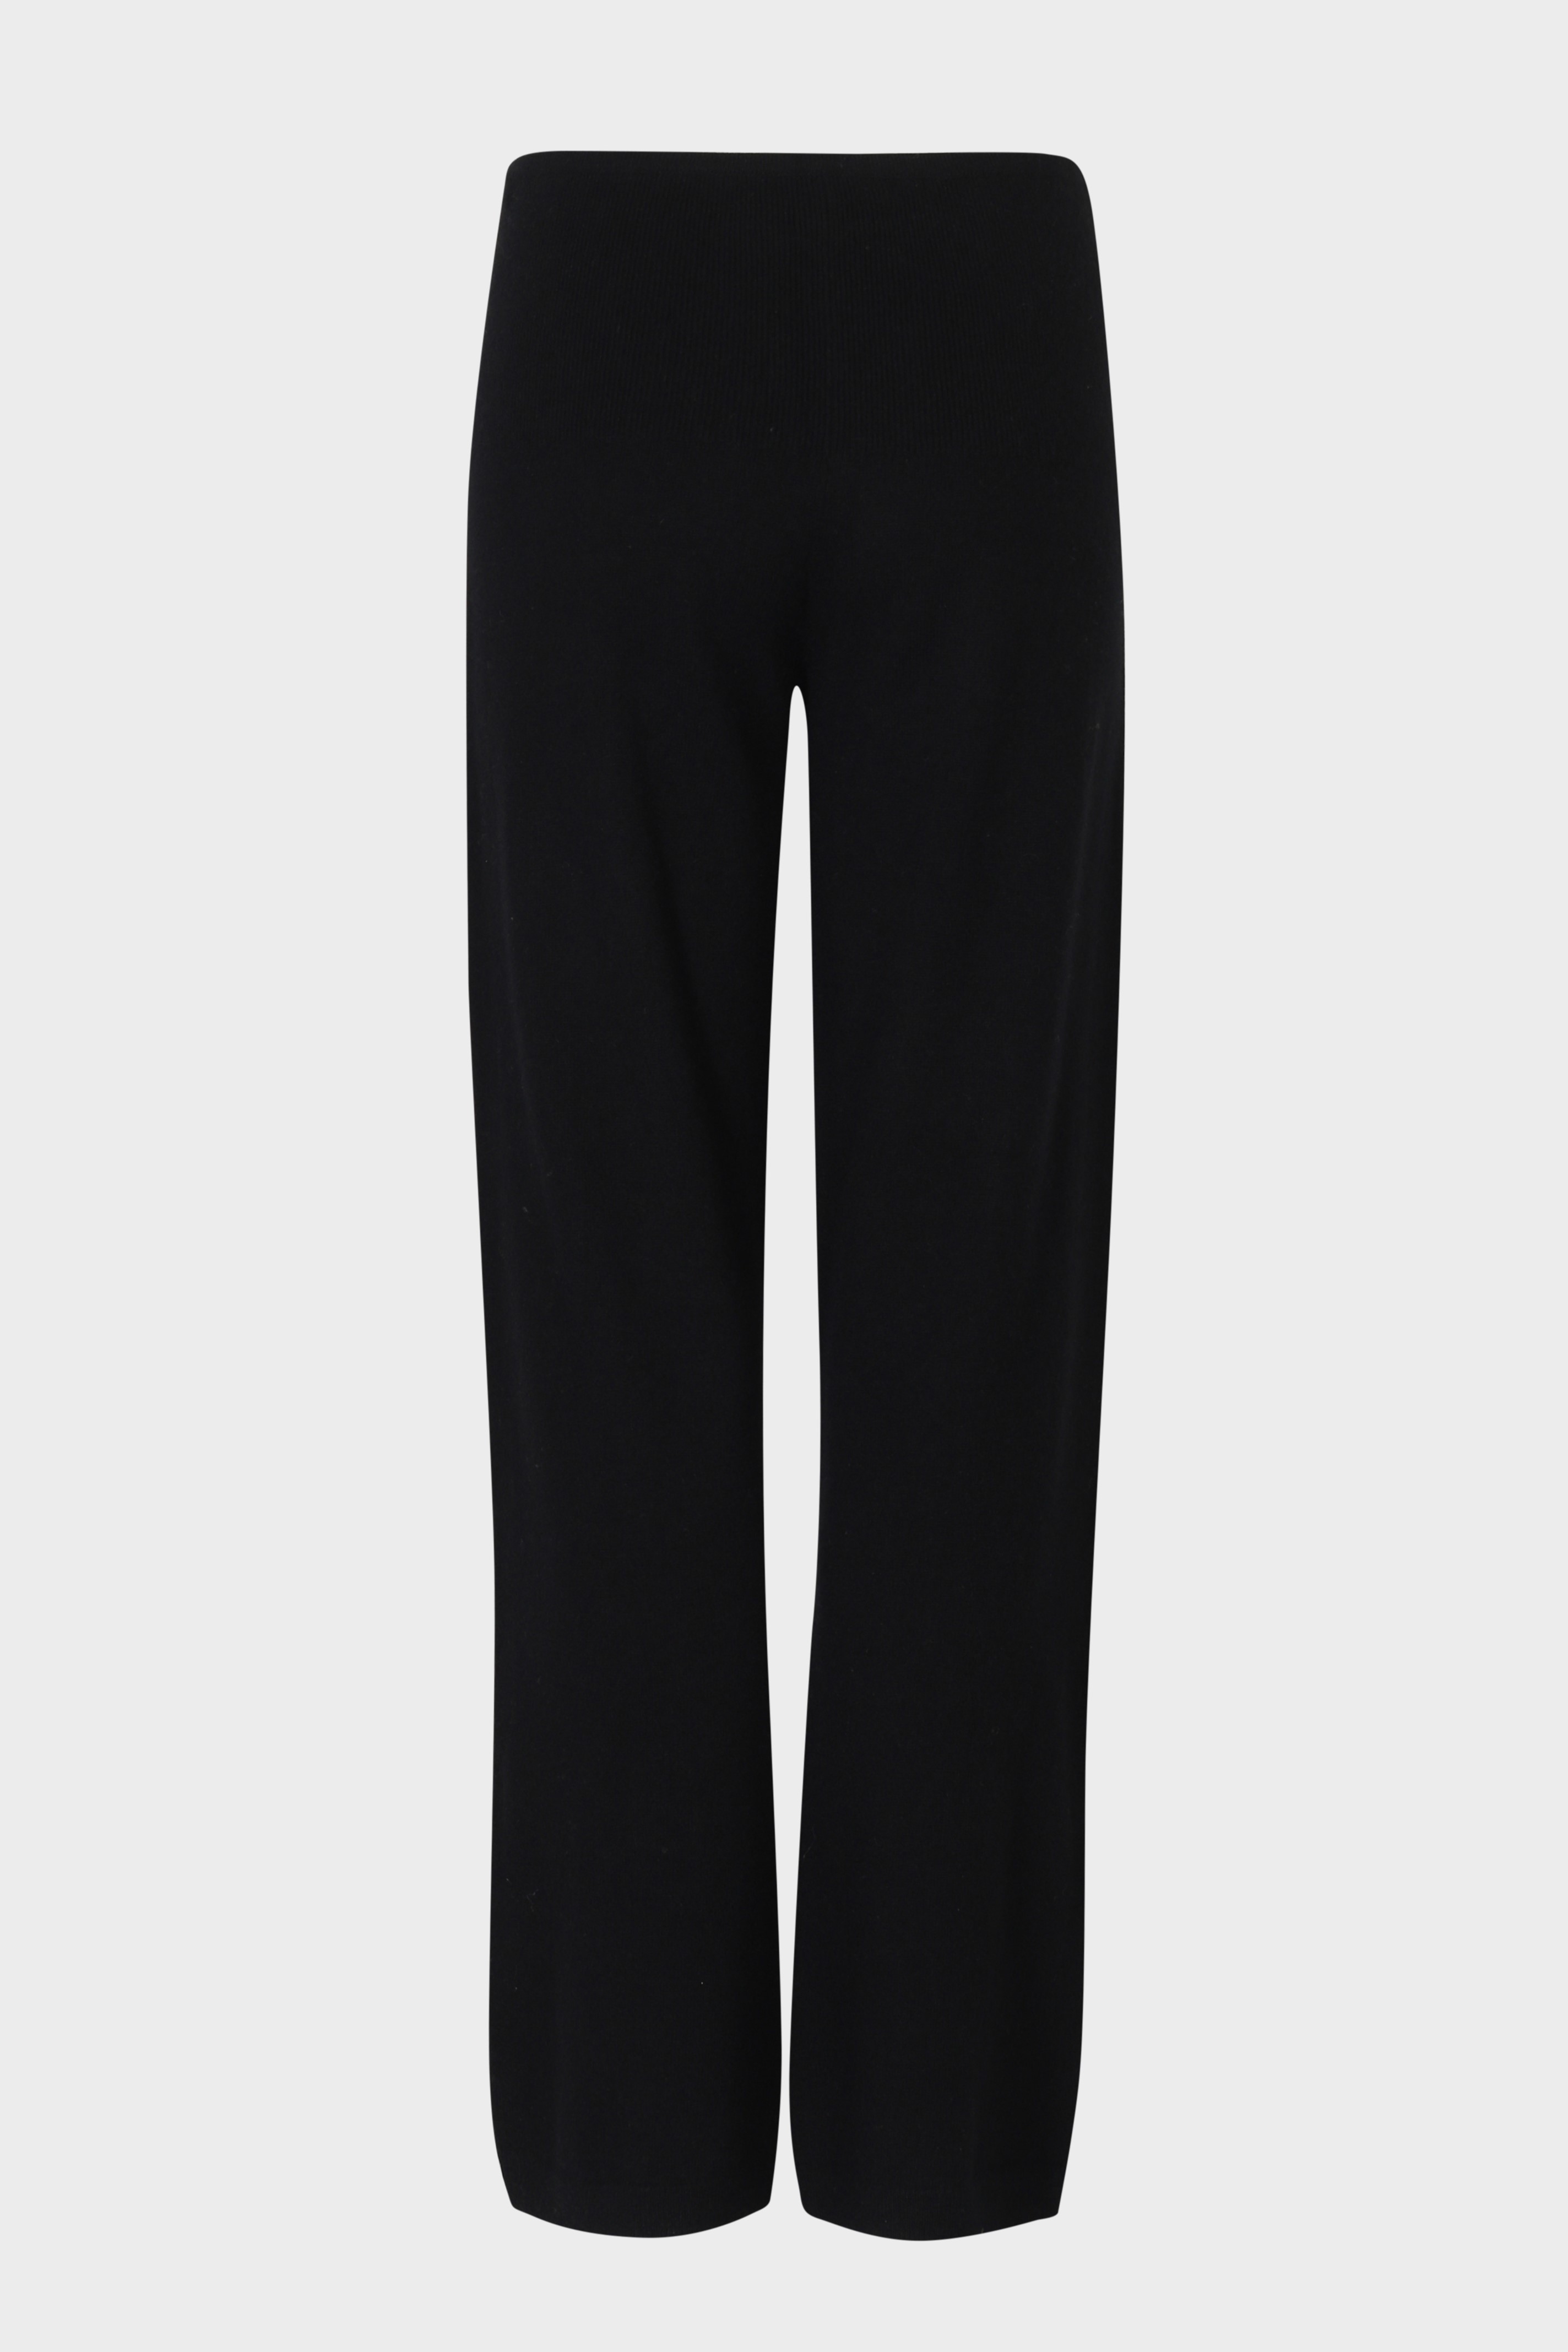 SMINFINITY Chilly Knit Pant in Black XS/S